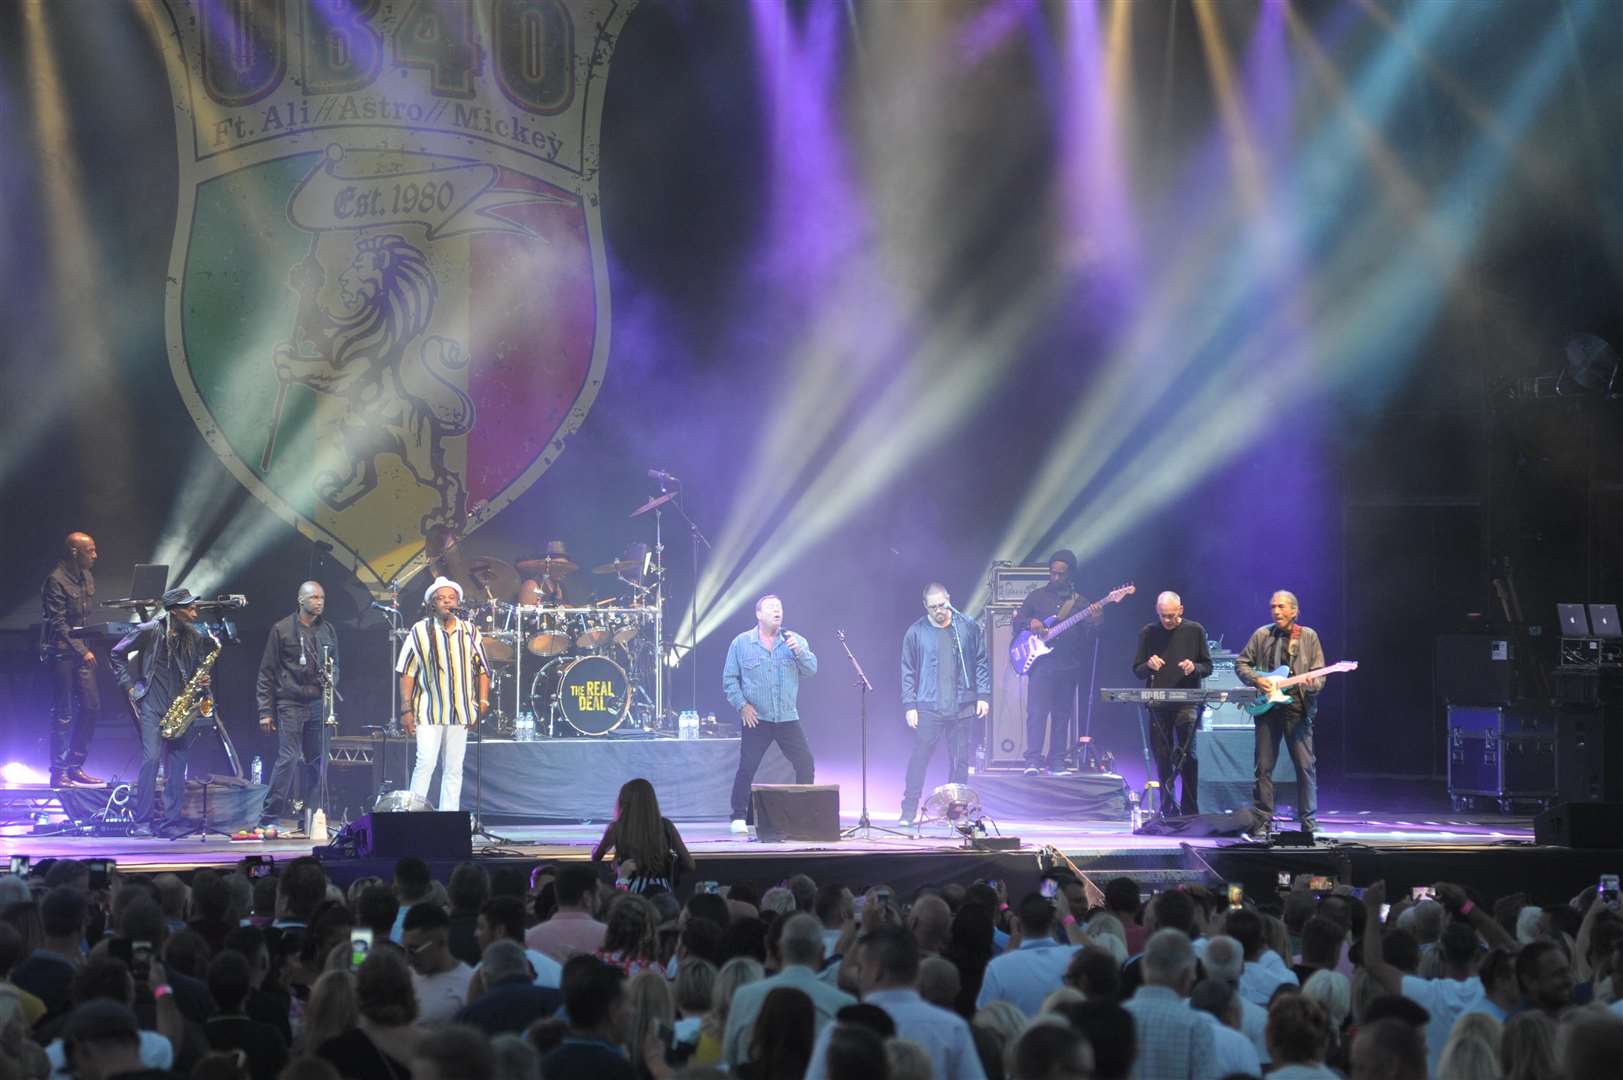 UB40 at last year's Rochester Castle Concerts, where people were unable to bring their own alcoholic drinks to. Picture: Steve Crispe